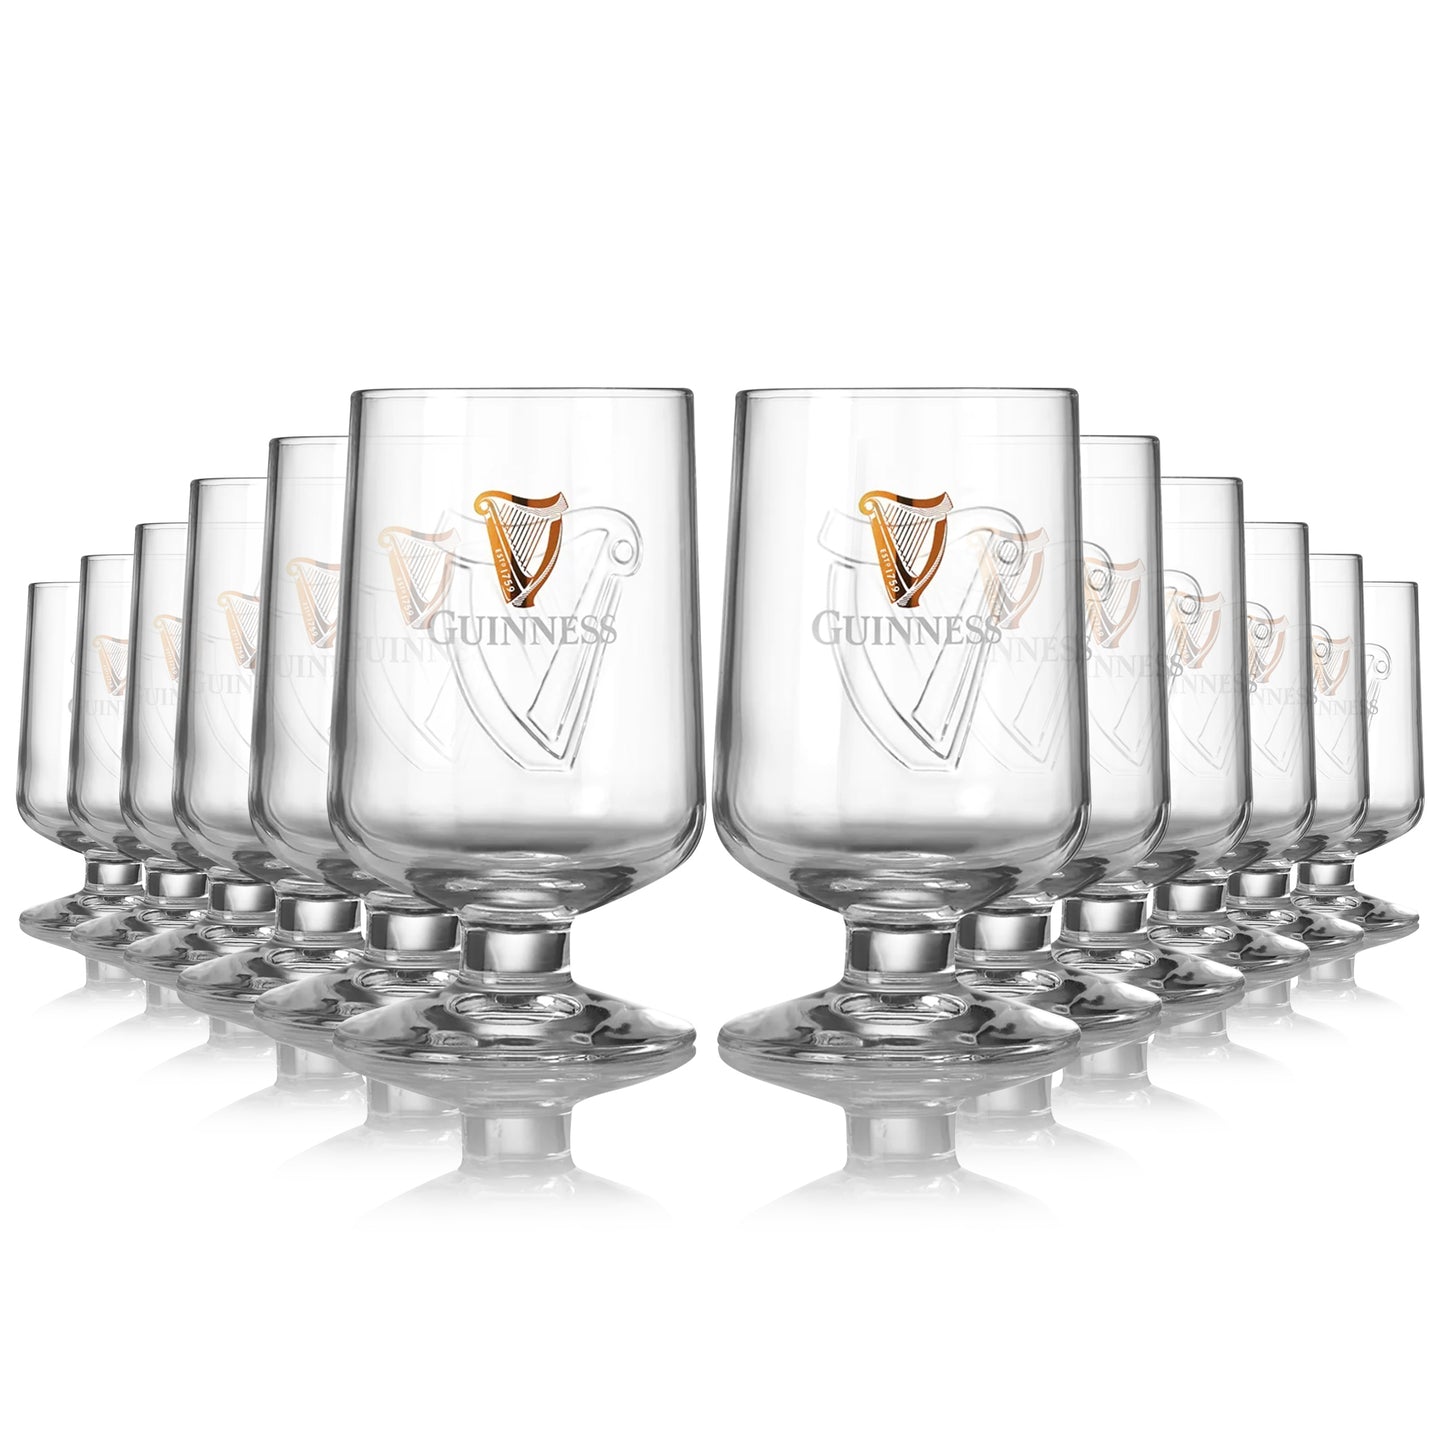 A set of Guinness Embossed Stem Glass 12 Pack with a Guinness logo on them.